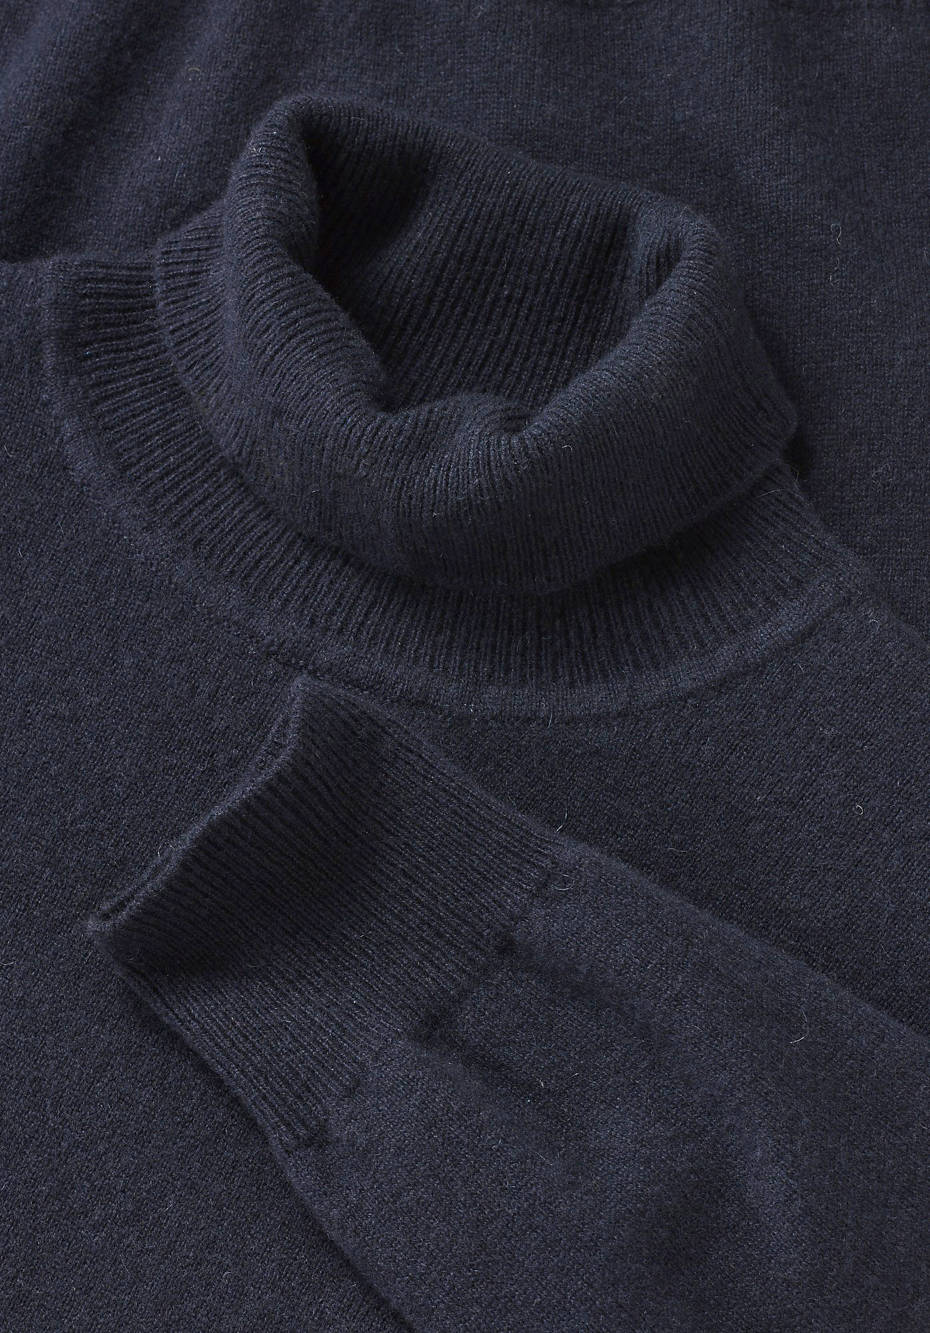 Turtleneck sweater made of virgin wool with cashmere